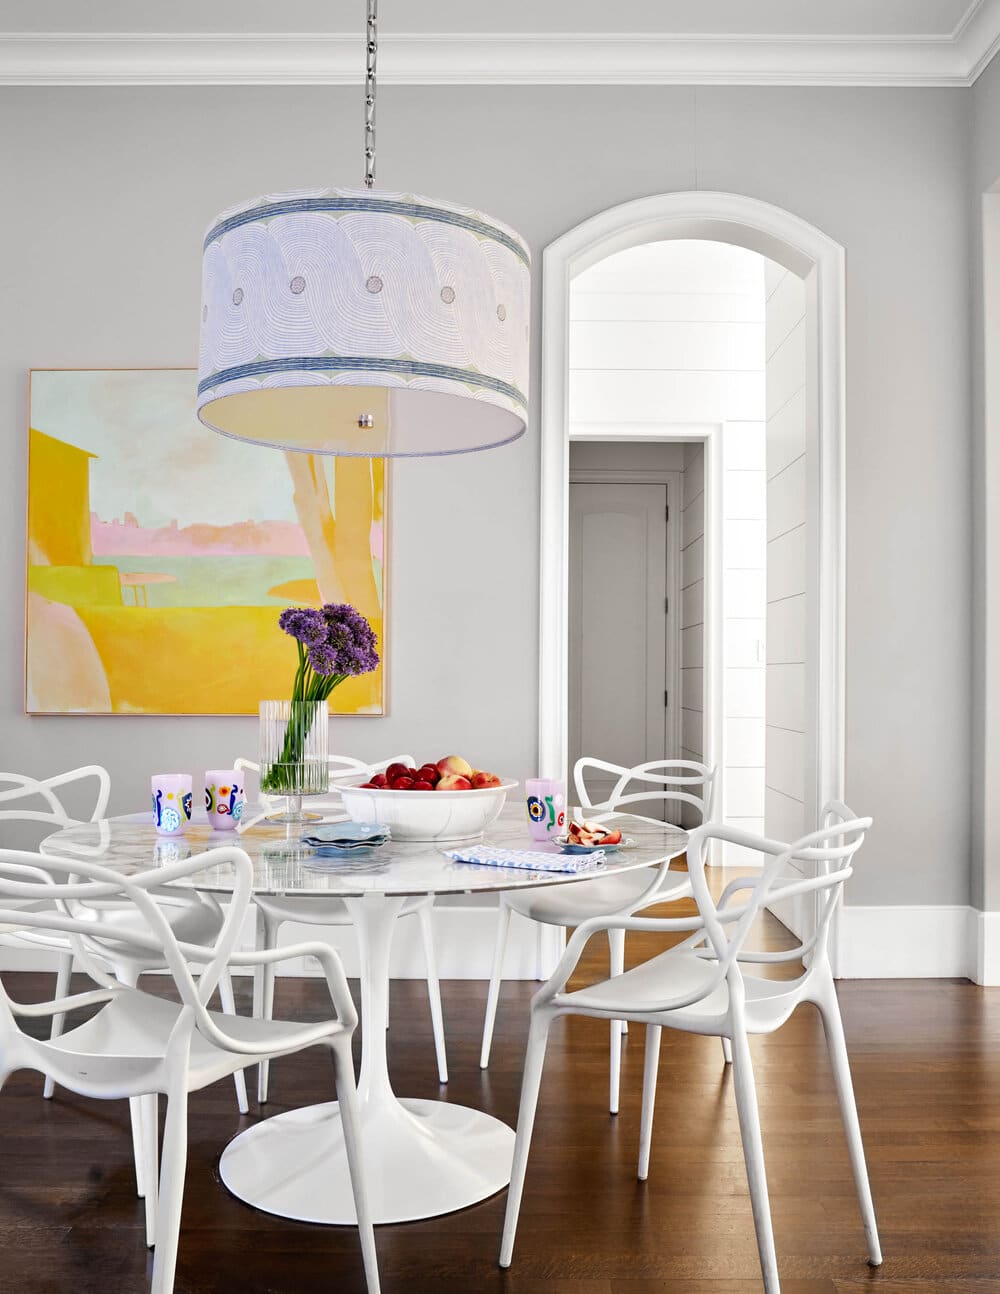 breakfast room with abstract art